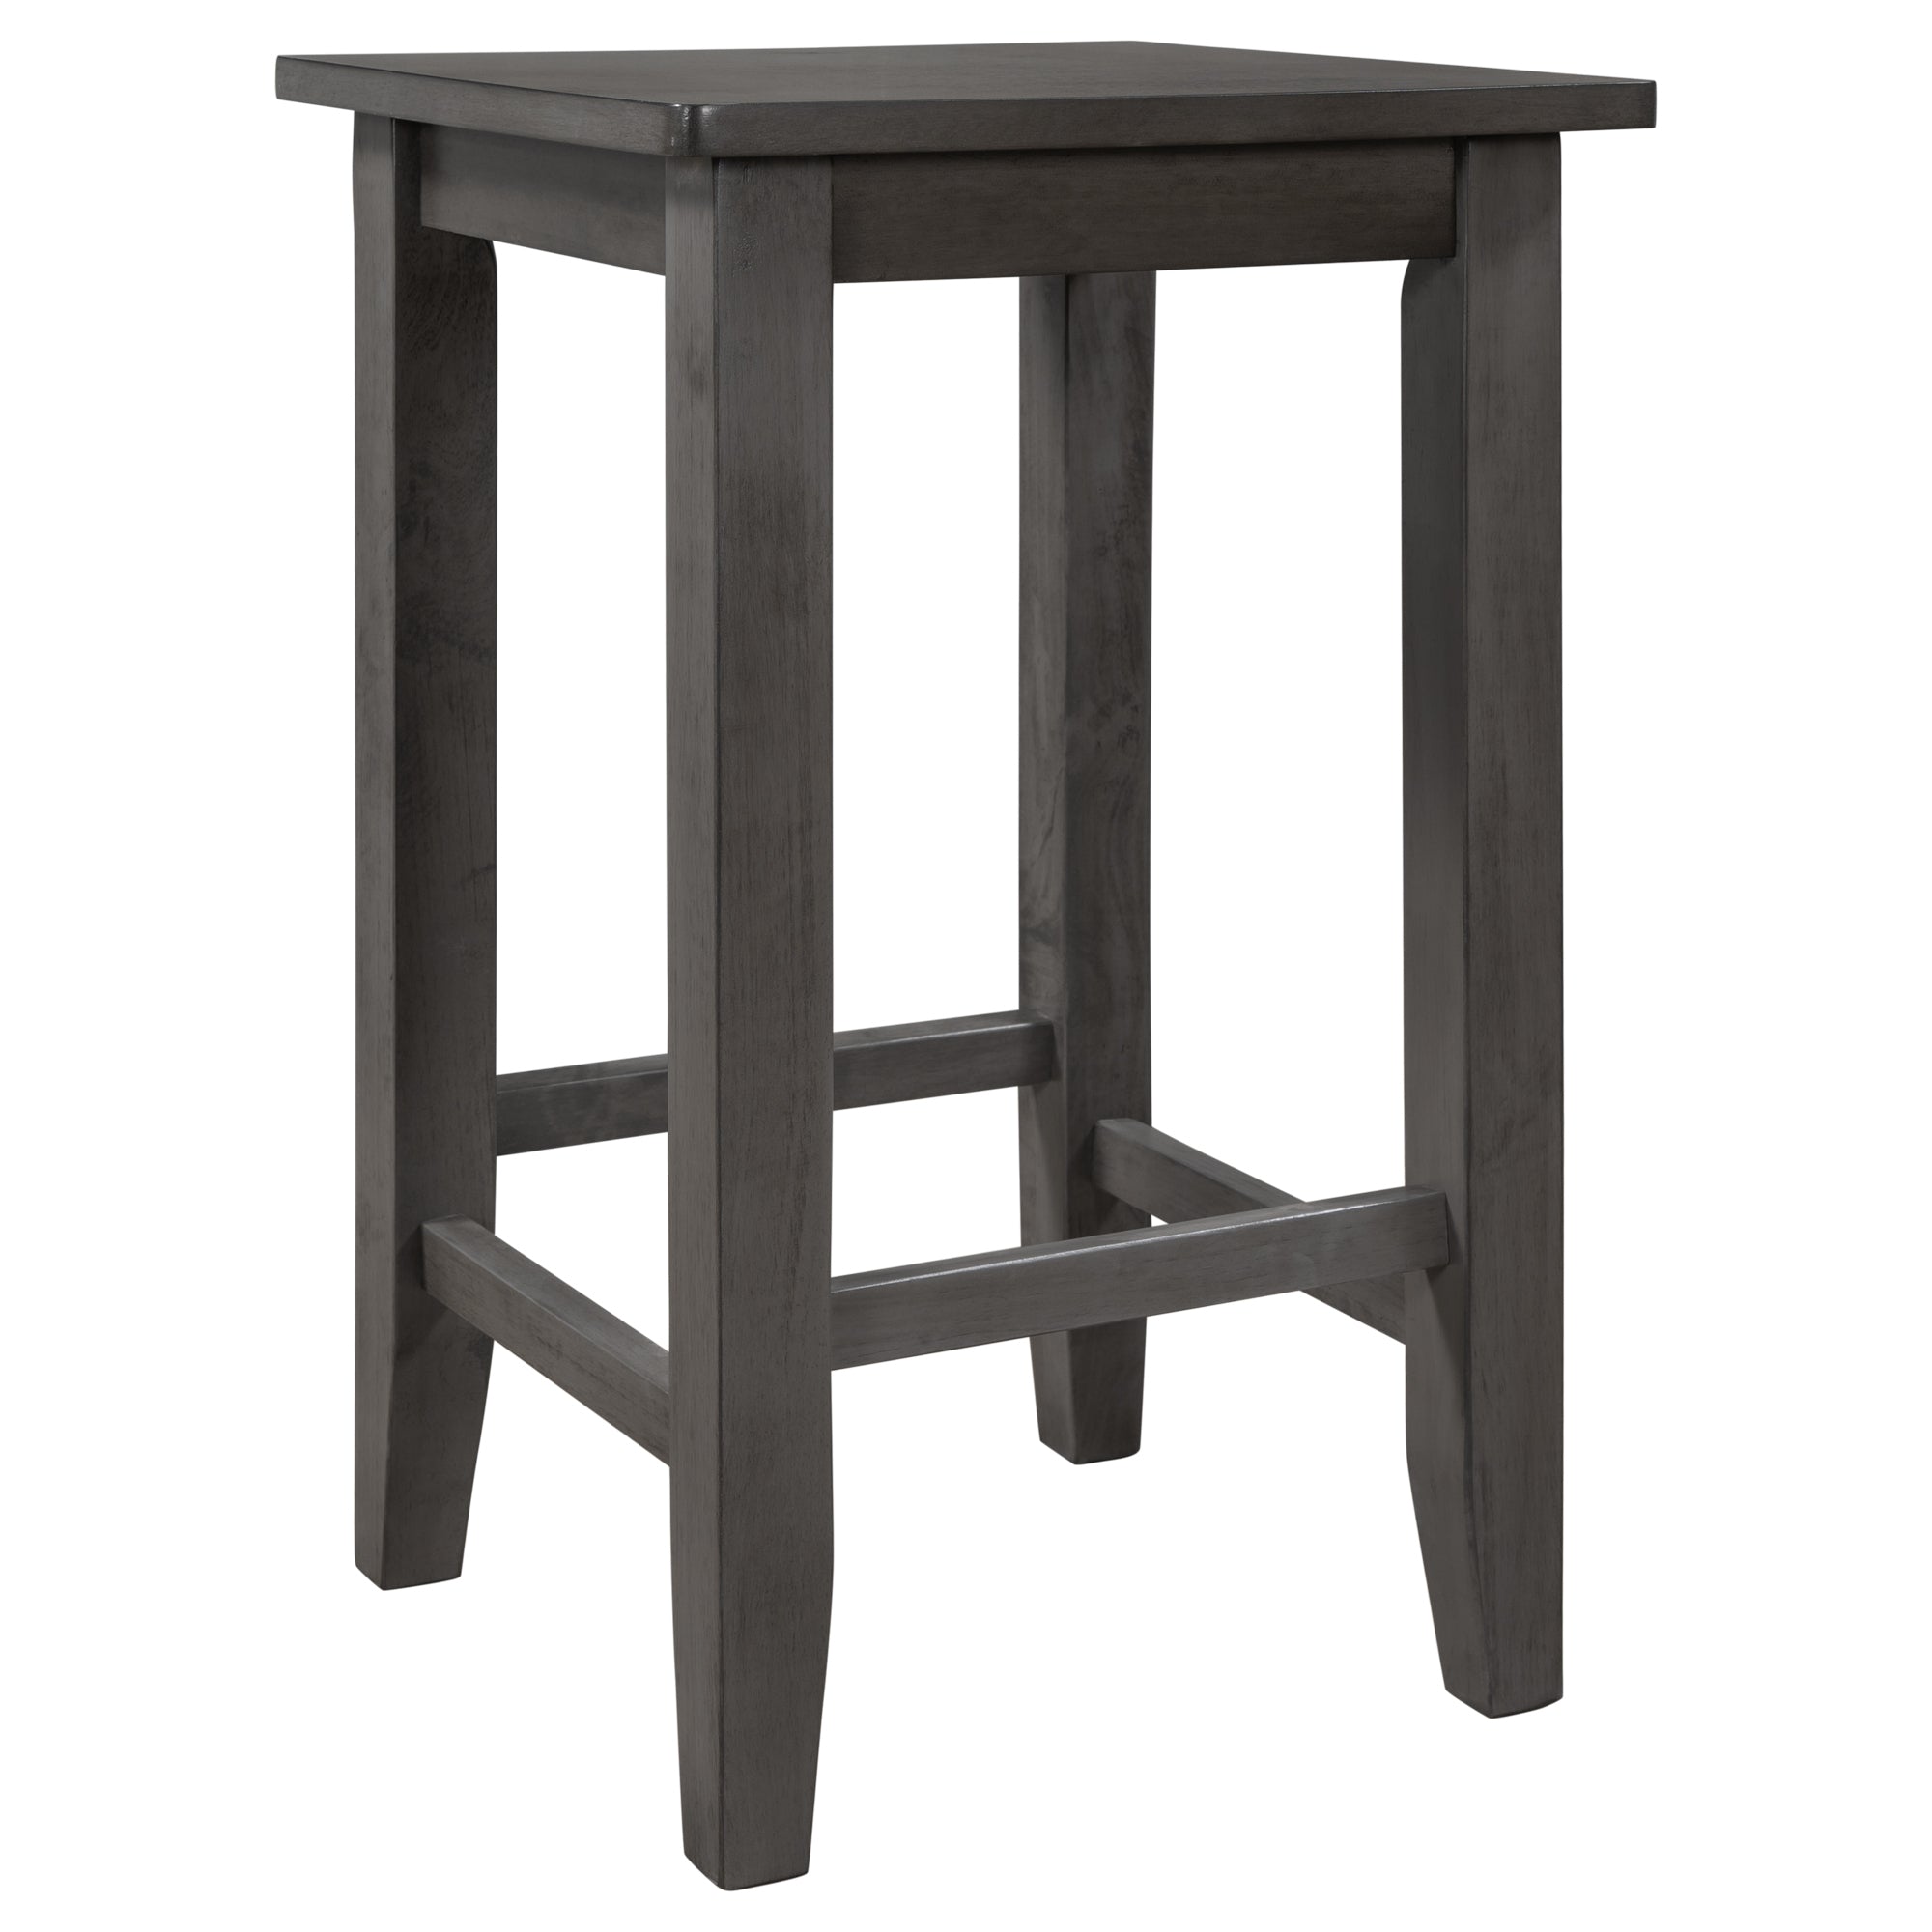 TOPMAX Country Farmhouse Counter Height Wood Set of 4 with 3 Stools and Storage Rack (Grey)